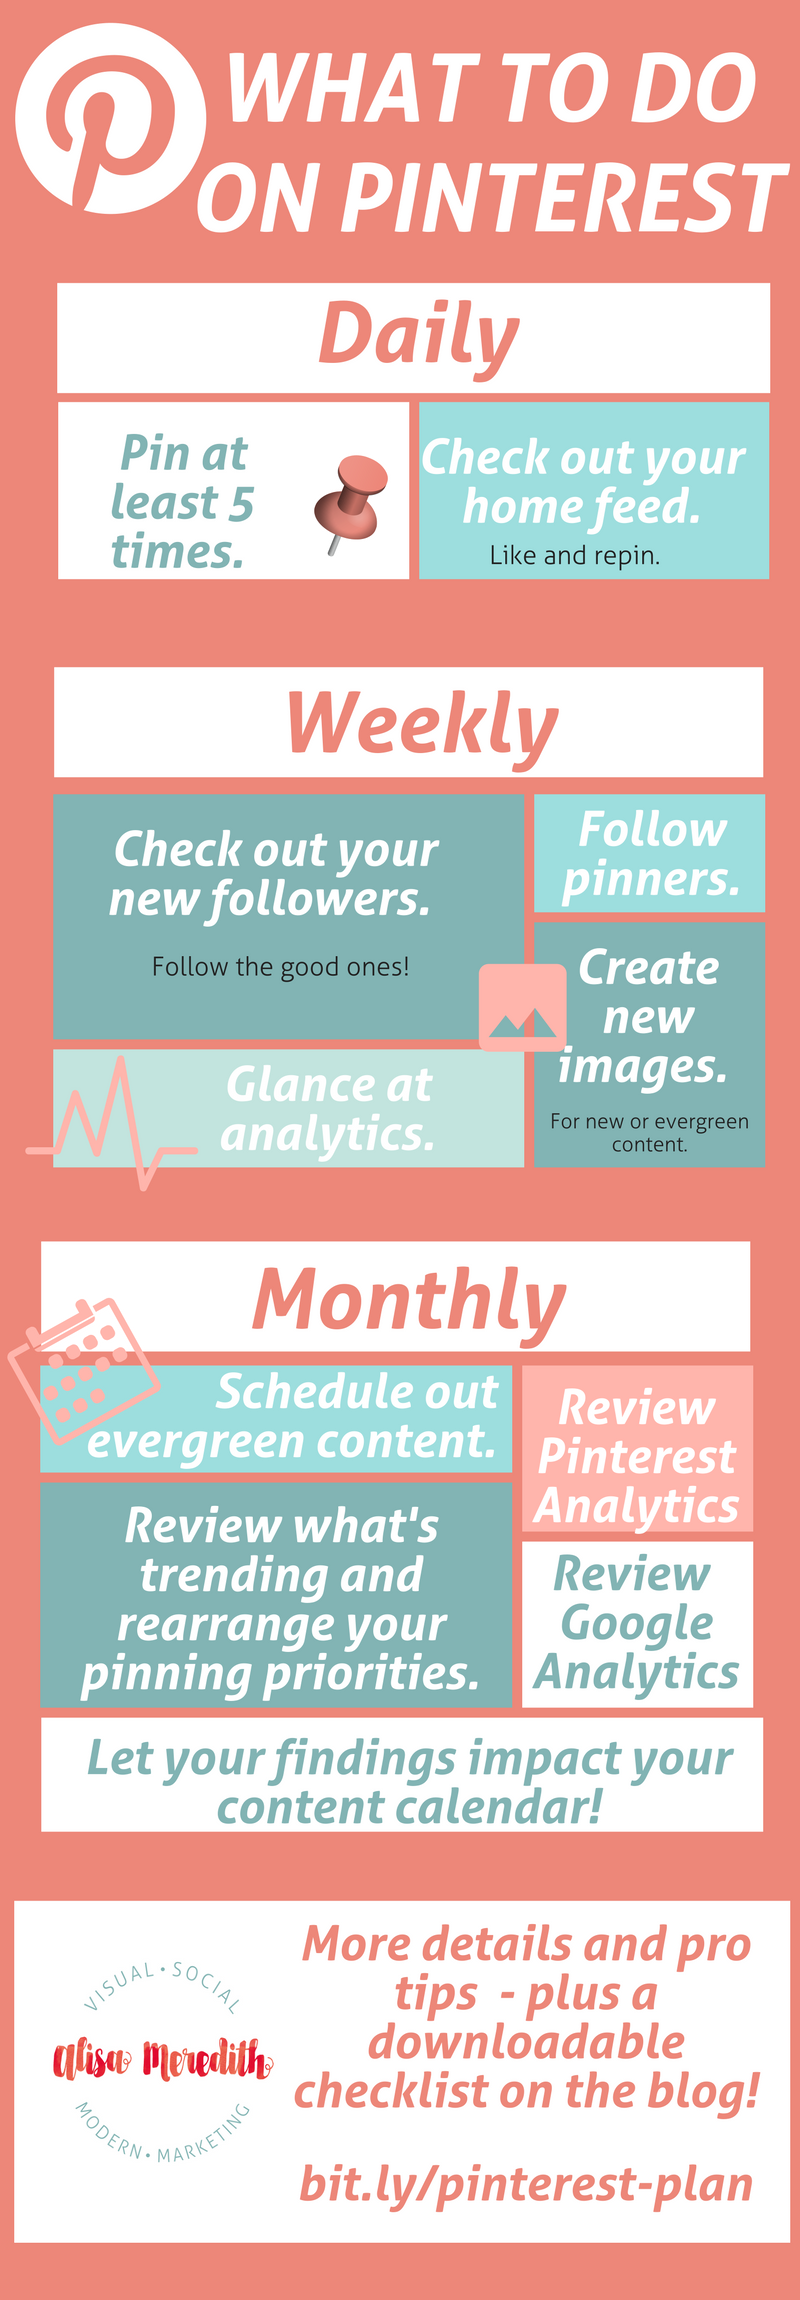 Exactly what to do on Pinterest daily, weekly, and monthly for ultimate Pinterest marketing success! via @alisammeredith